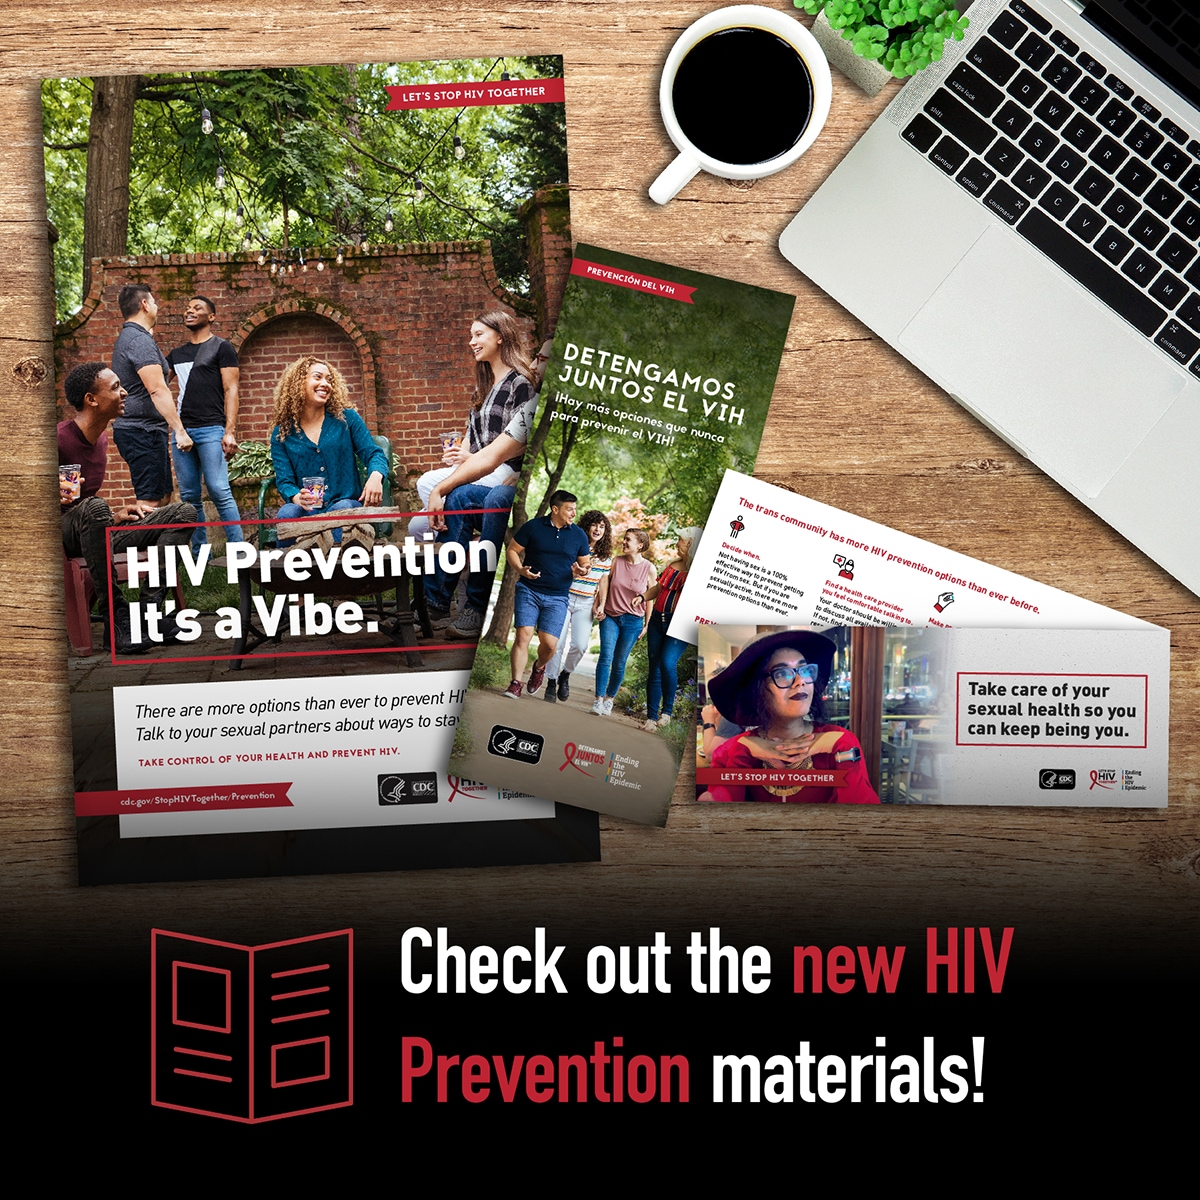 Check out the new HIV Prevention materials!